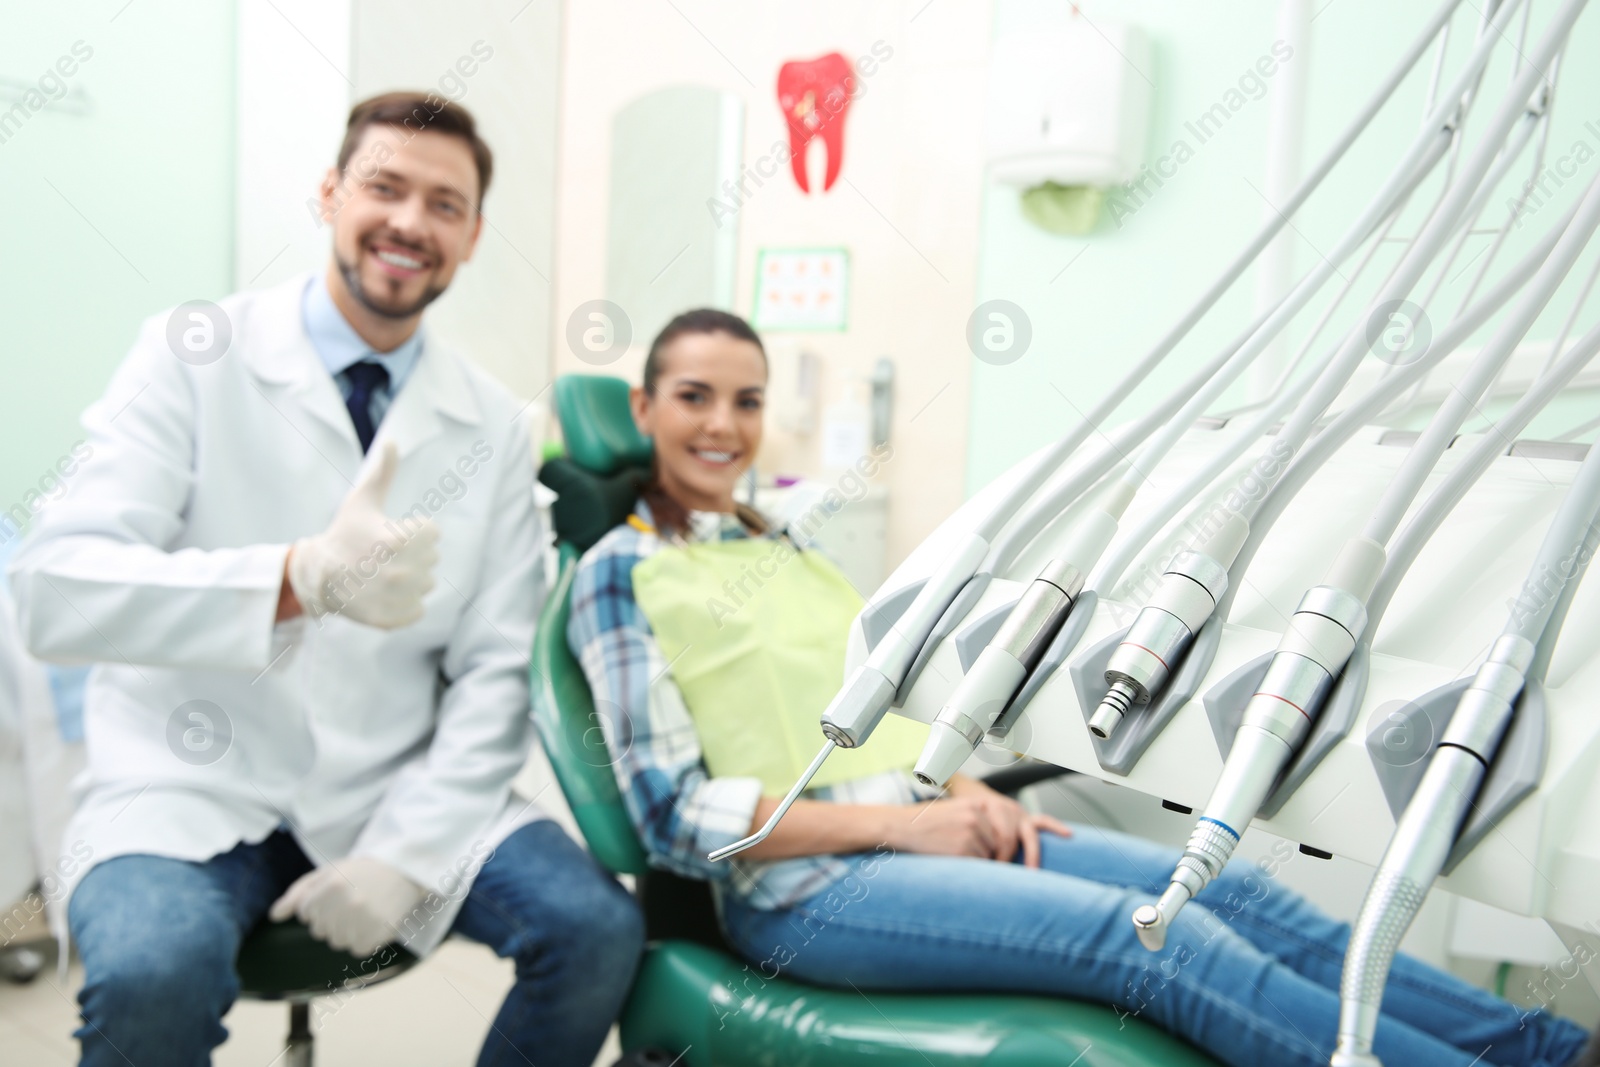 Photo of Professional dentist's equipment and blurred doctor with patient on background